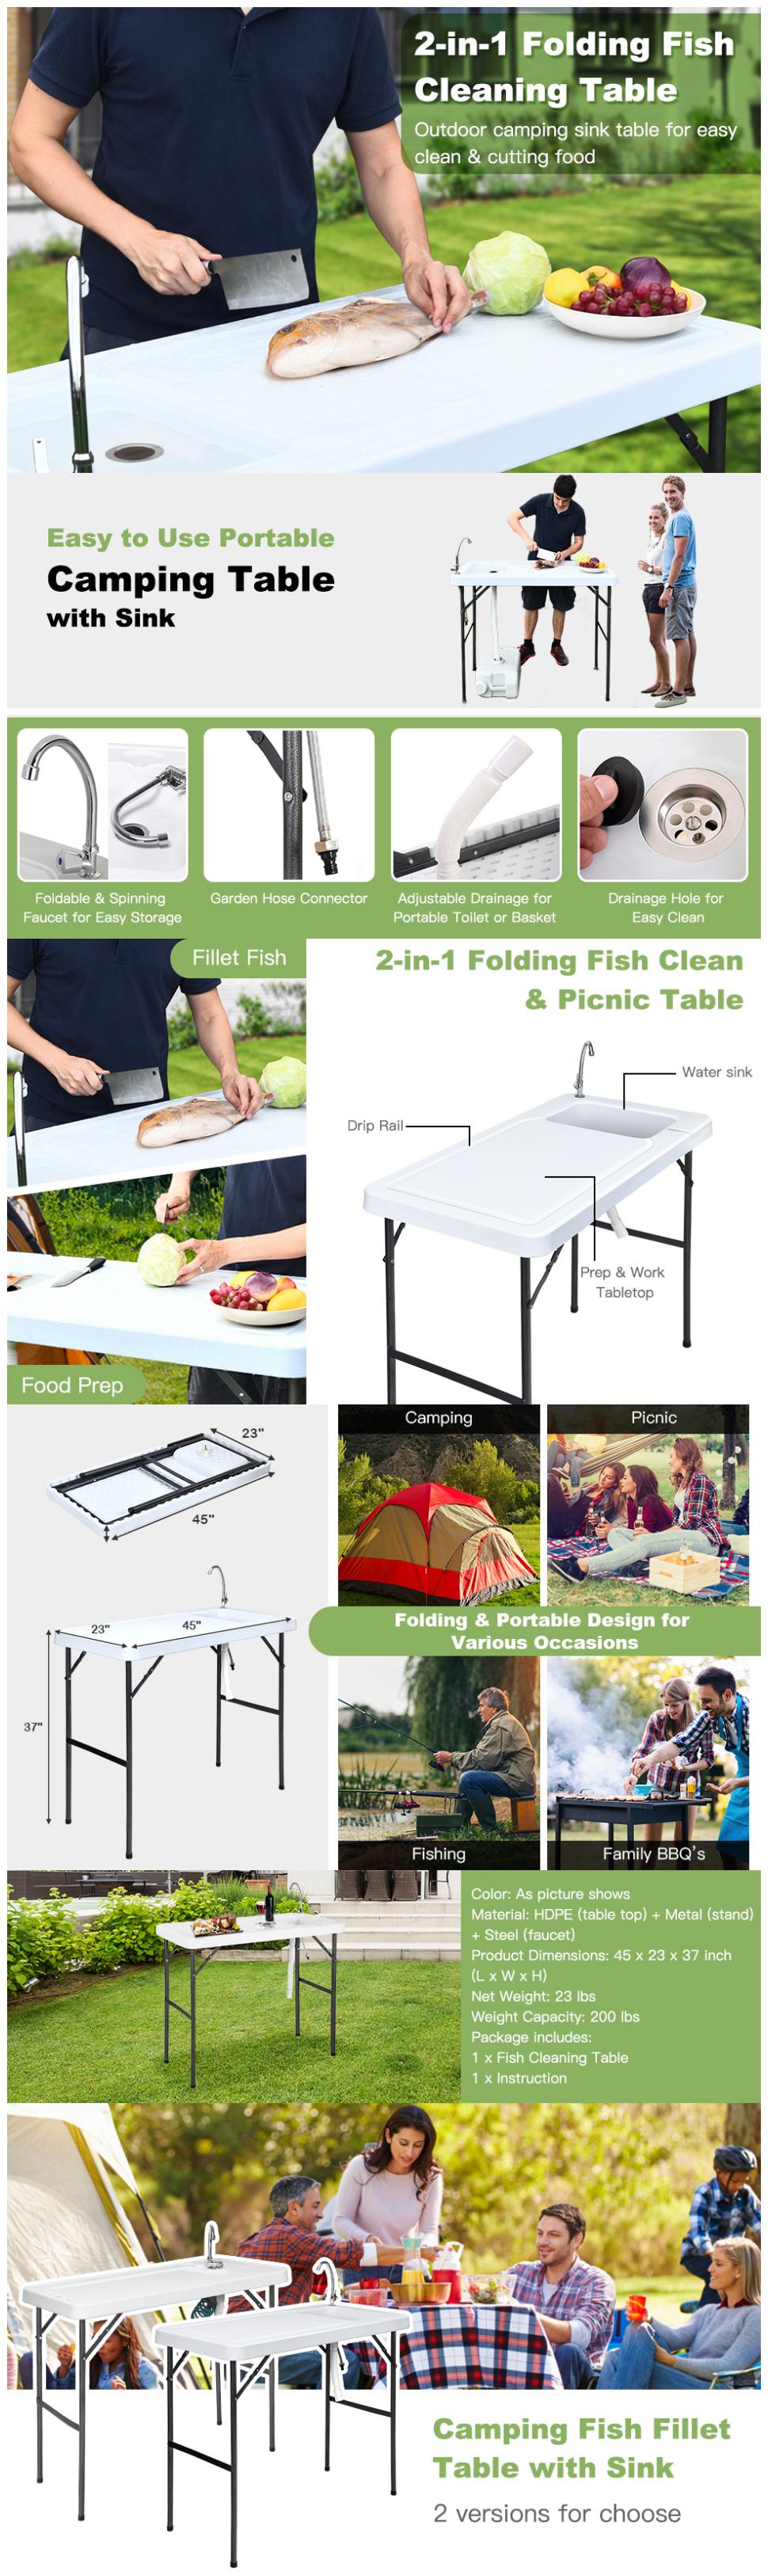 Folding Portable Fish Hunting Cleaning Cutting Table